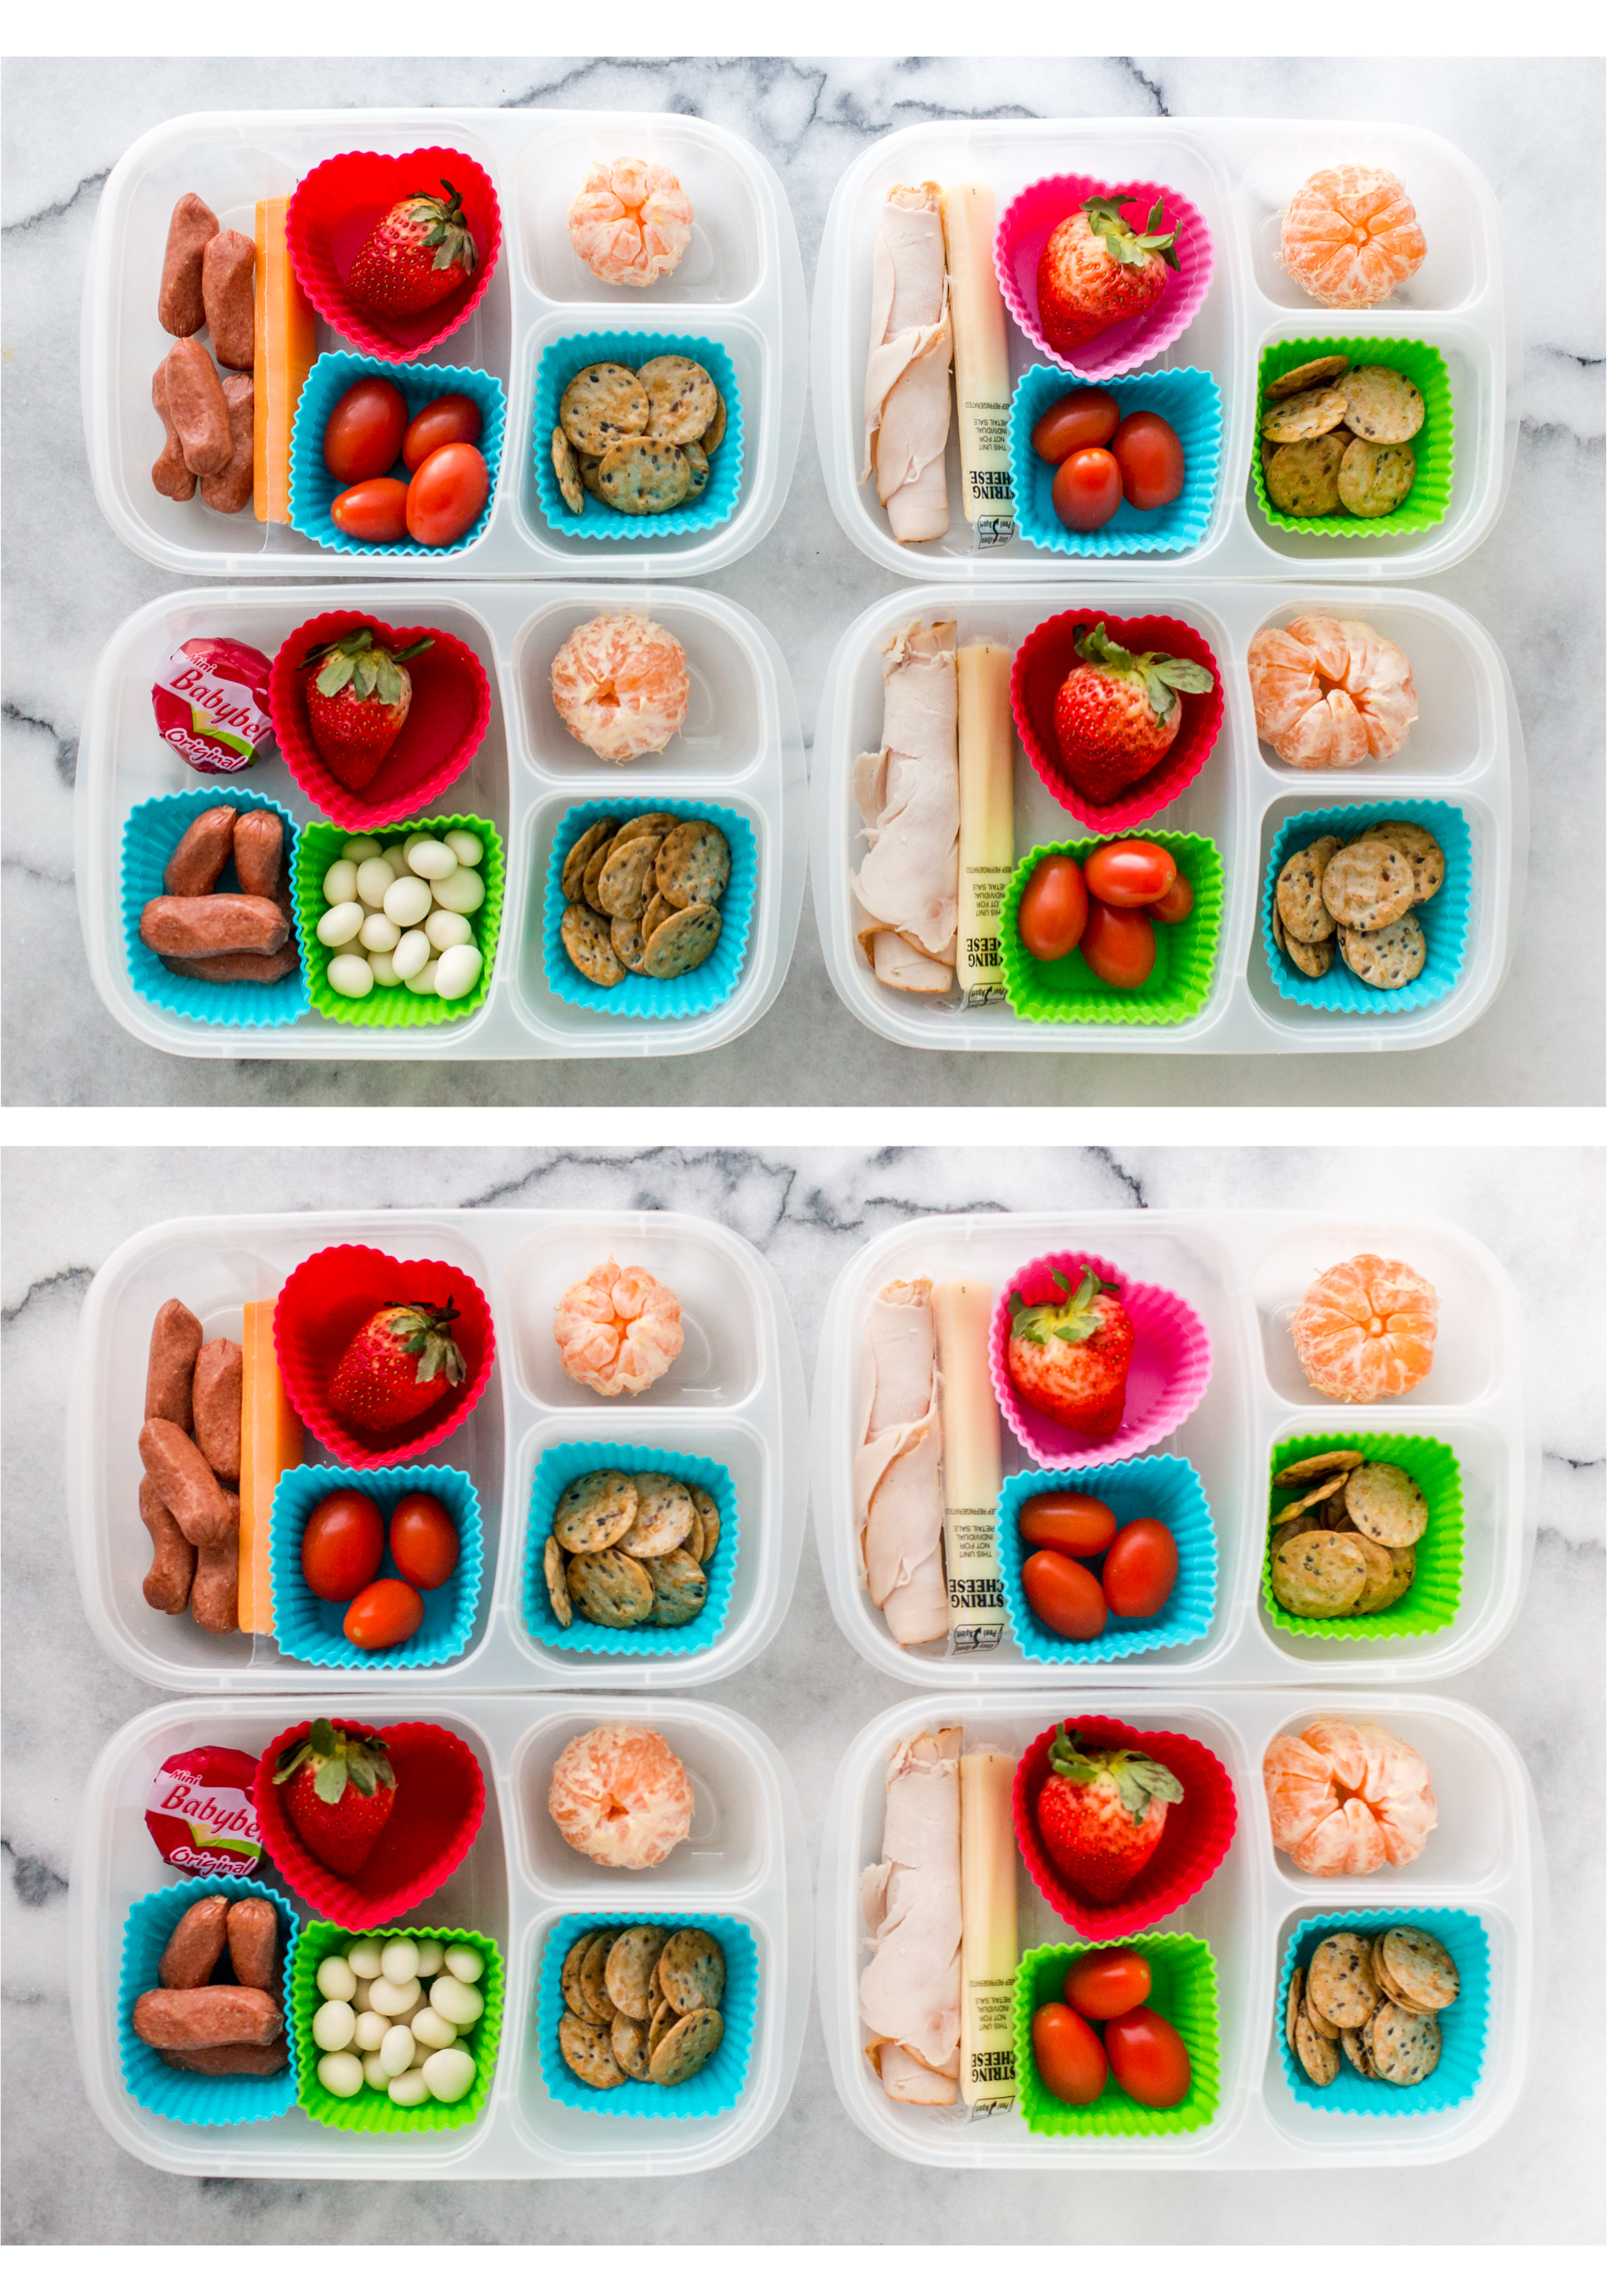 School Lunch Packing Time is Here! Keep Lunches HOT or COLD Easily